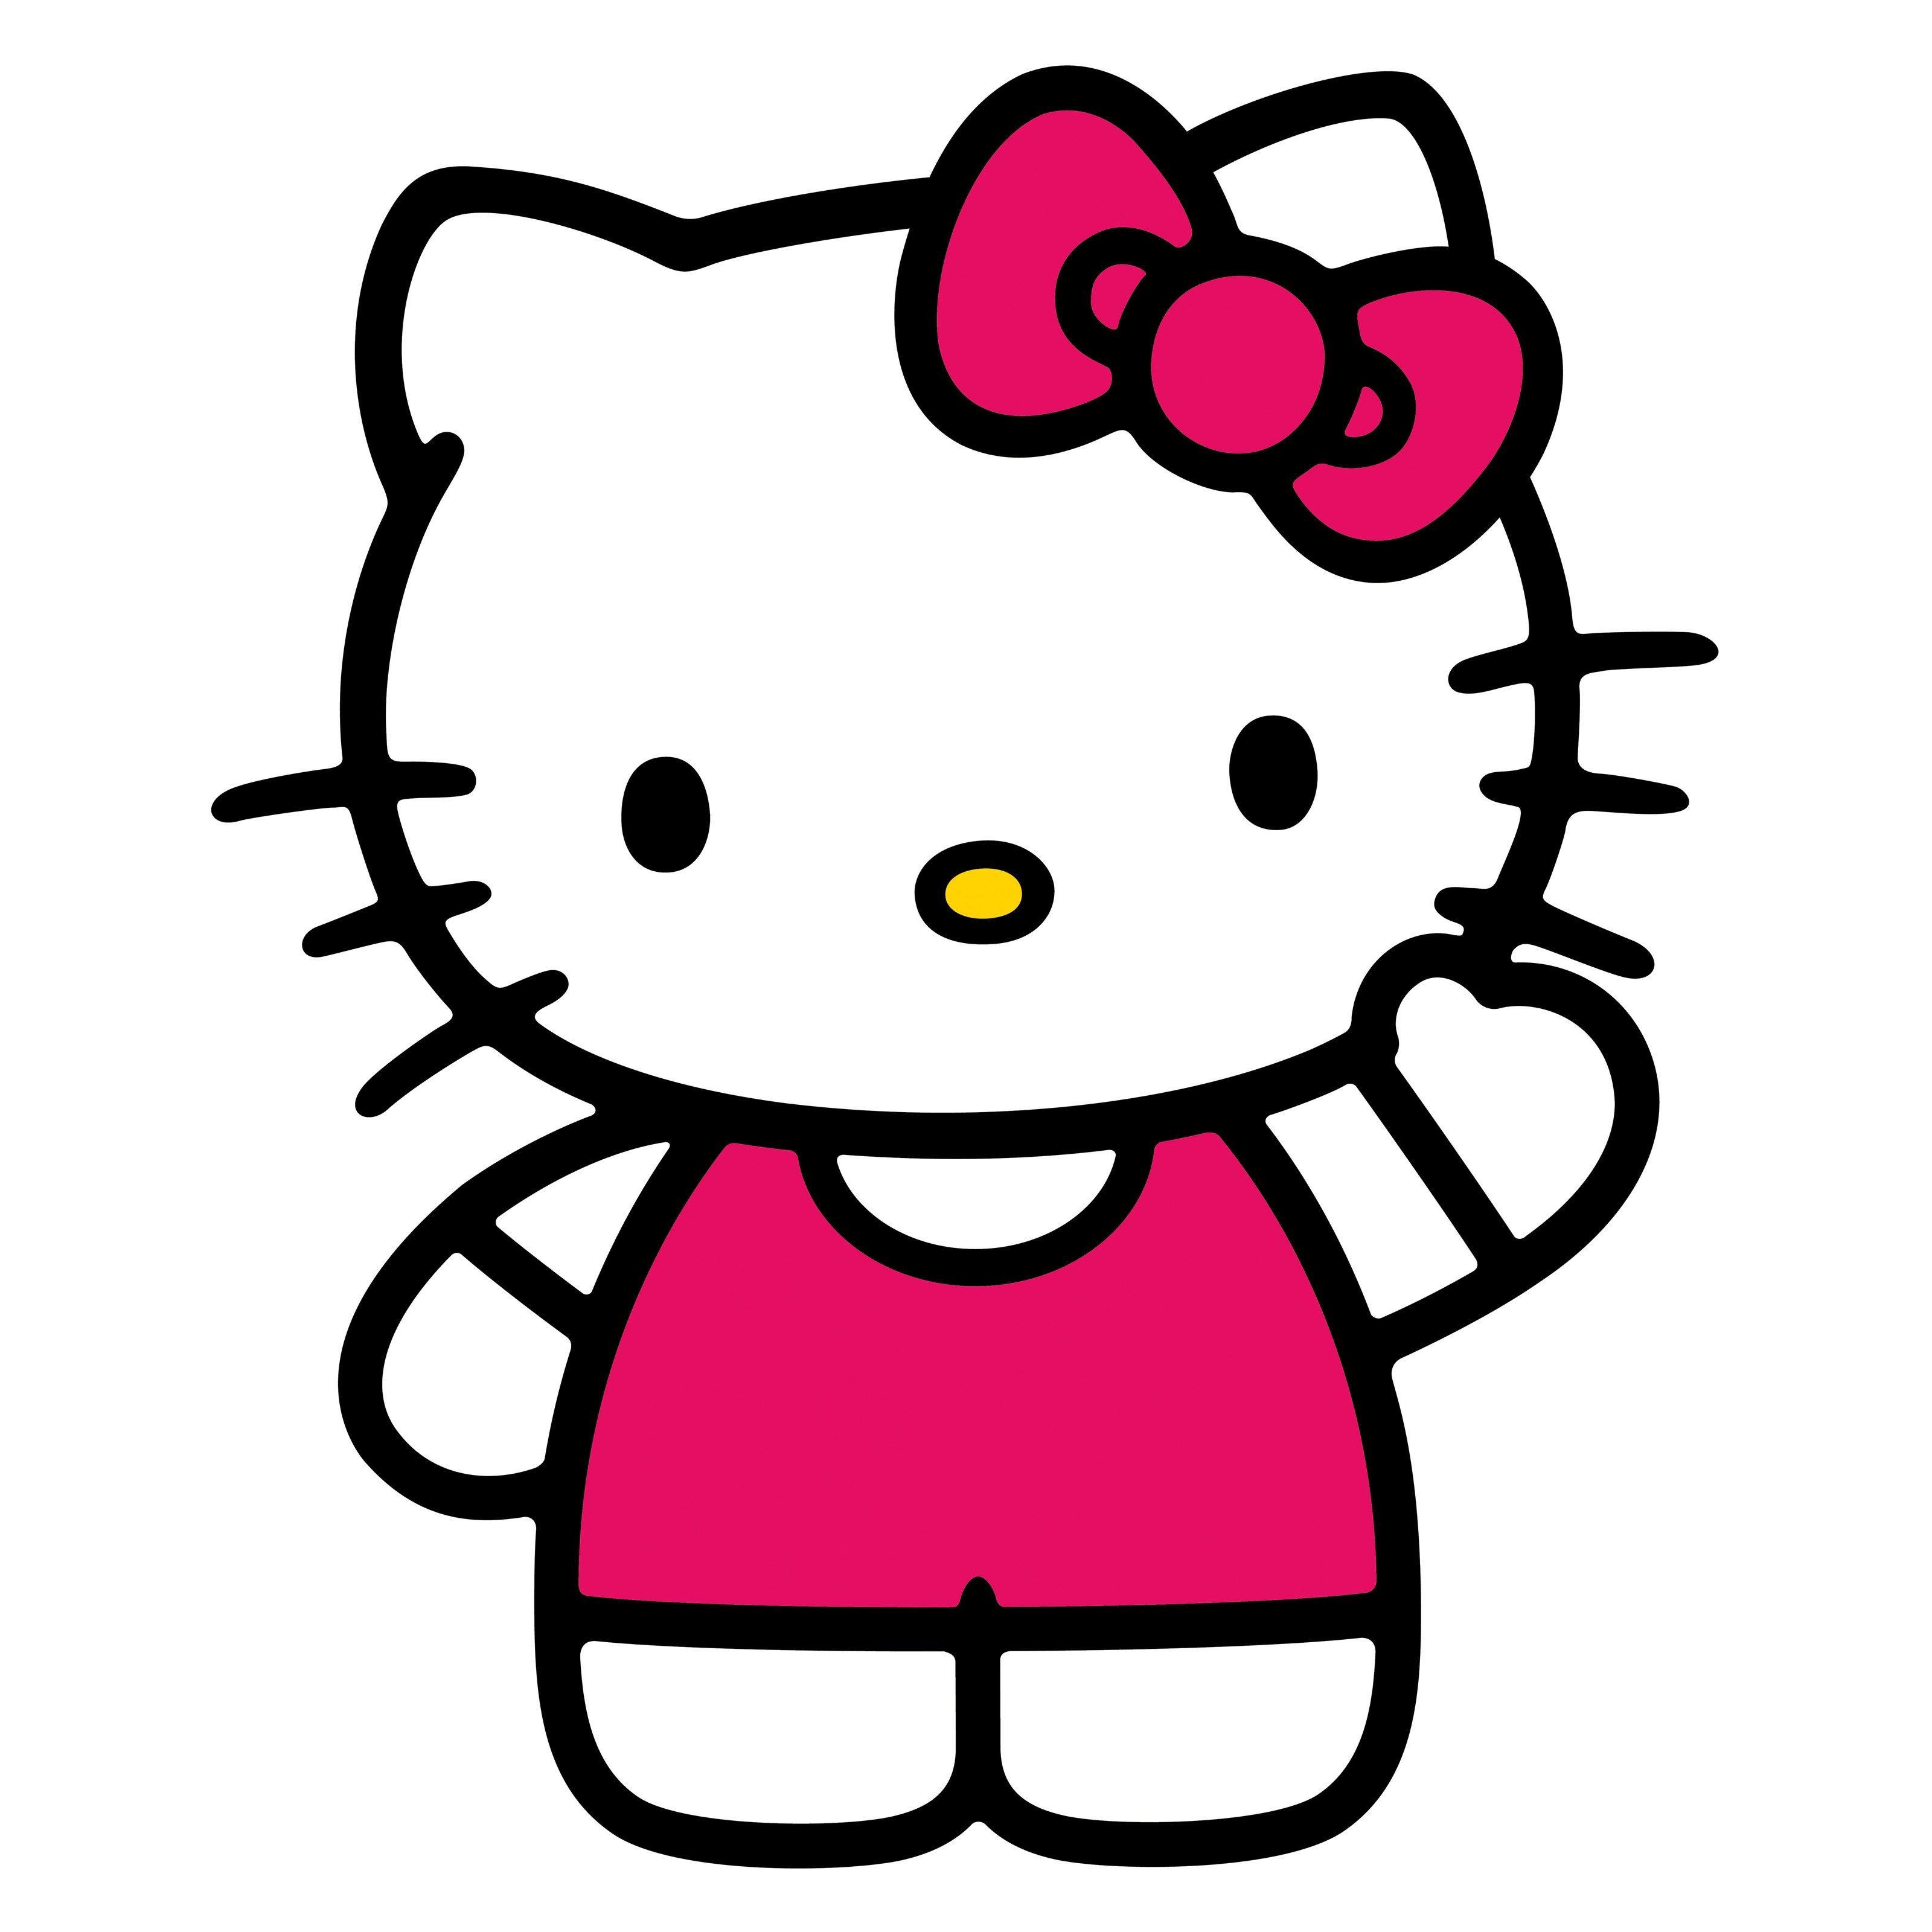 Download Cute Hello Kitty Pink Wallpaper | Full HD Wallpapers